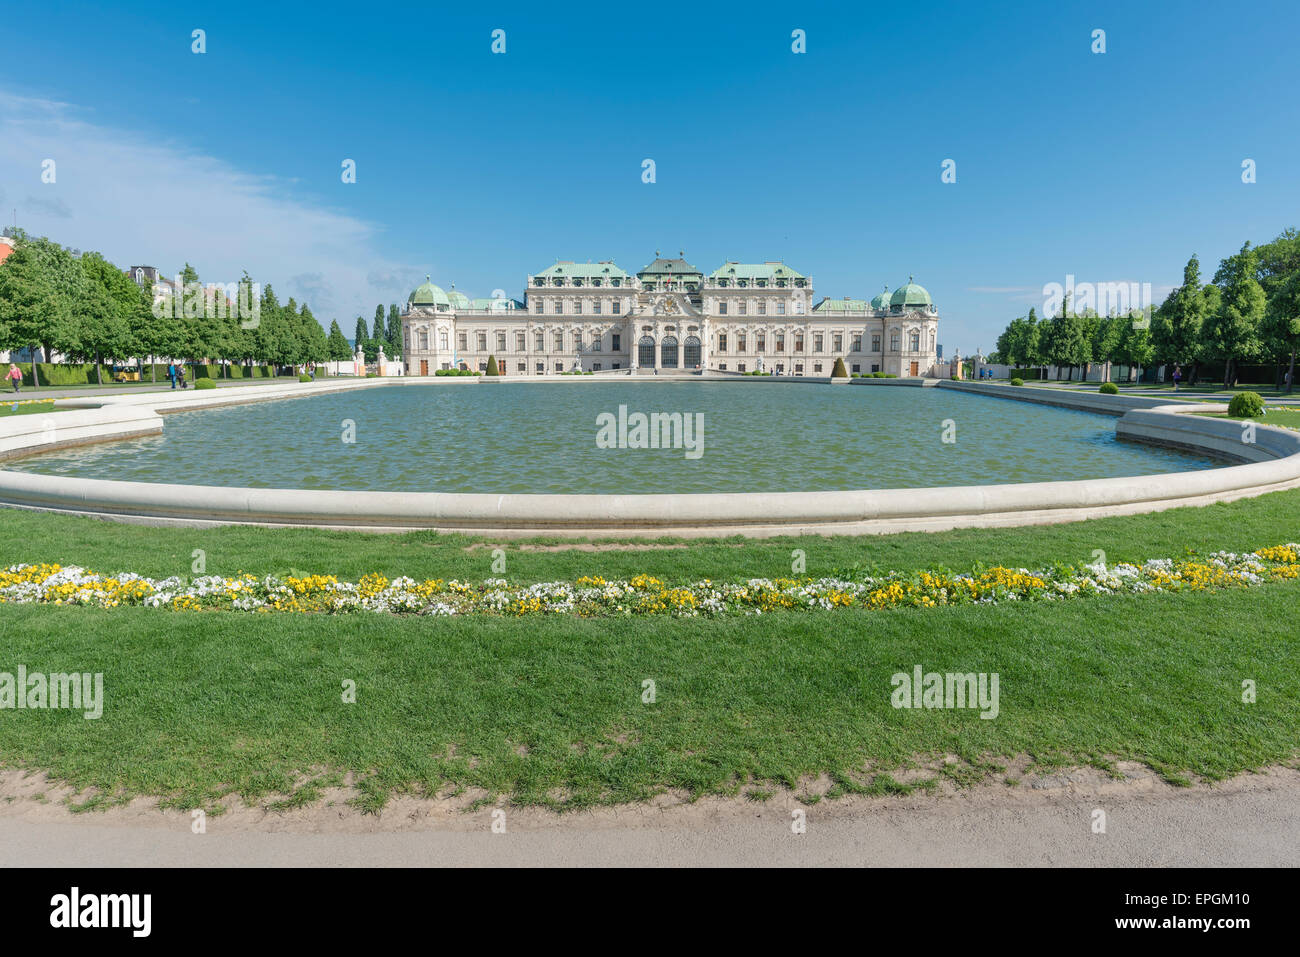 Belvedere Palace Vienna, view of the ornamental pool in the the formal landscaped gardens of the Schloss Belvedere, Vienna, Wien, Austria. Stock Photo